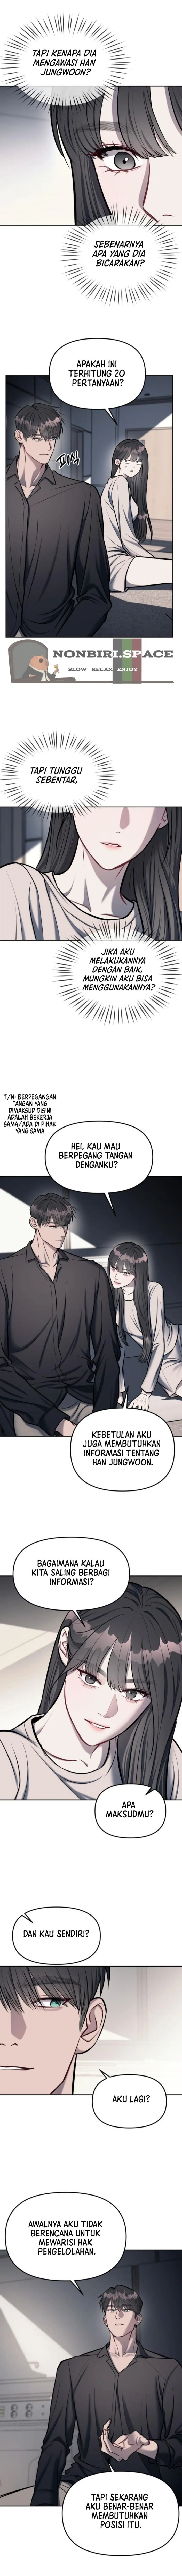 Undercover! Chaebol High School Chapter 17 - 103